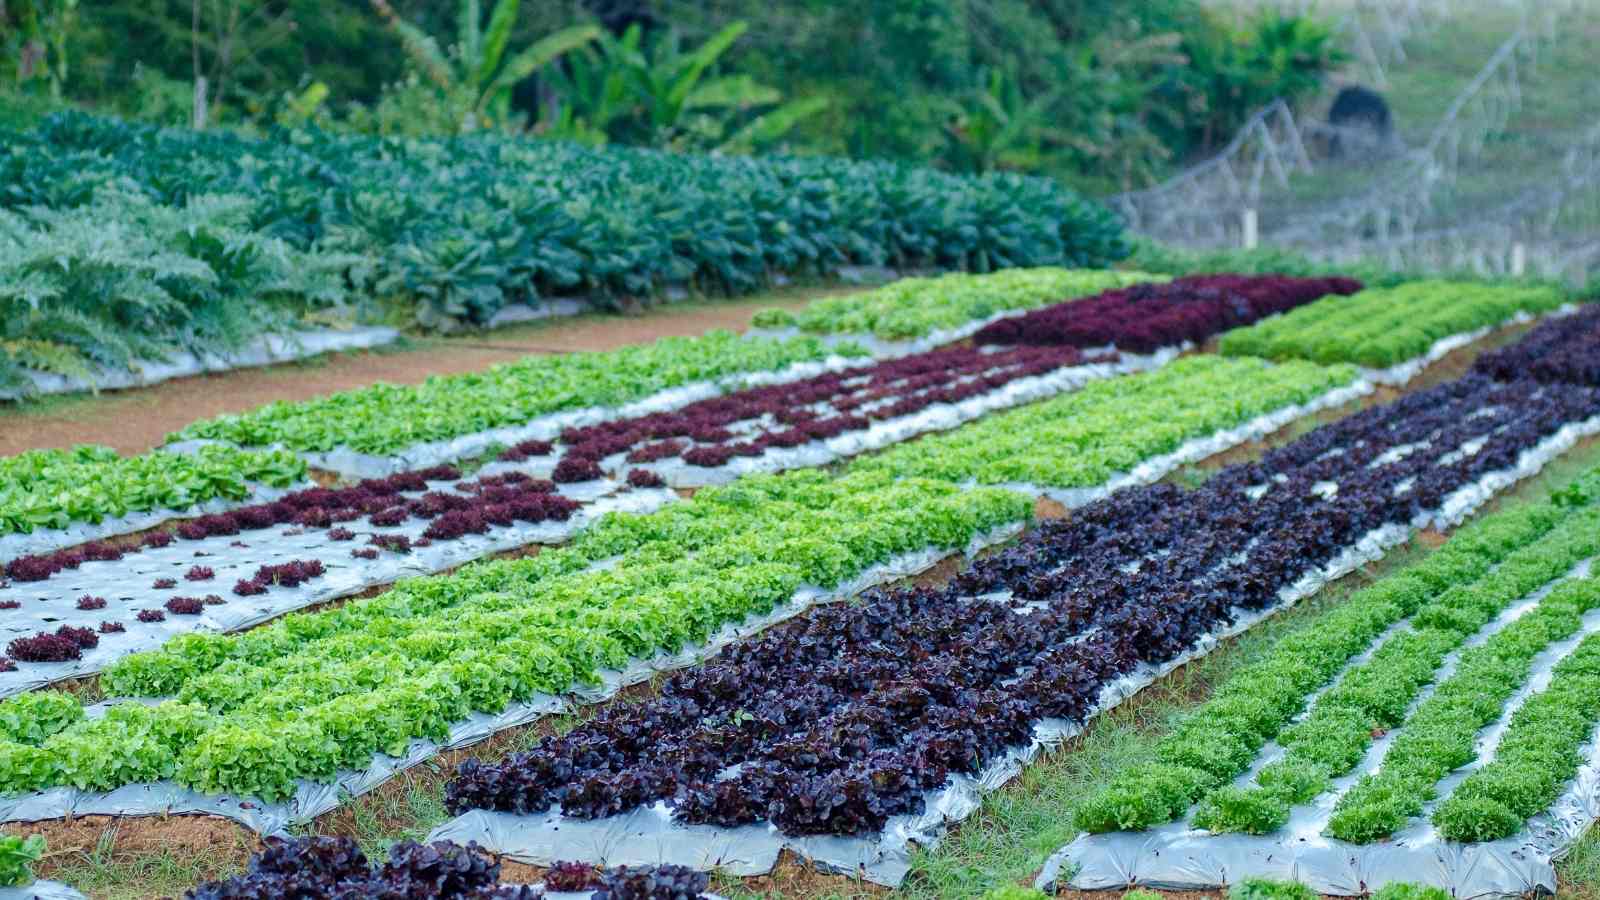 To Understand the Organic Farming More Closely